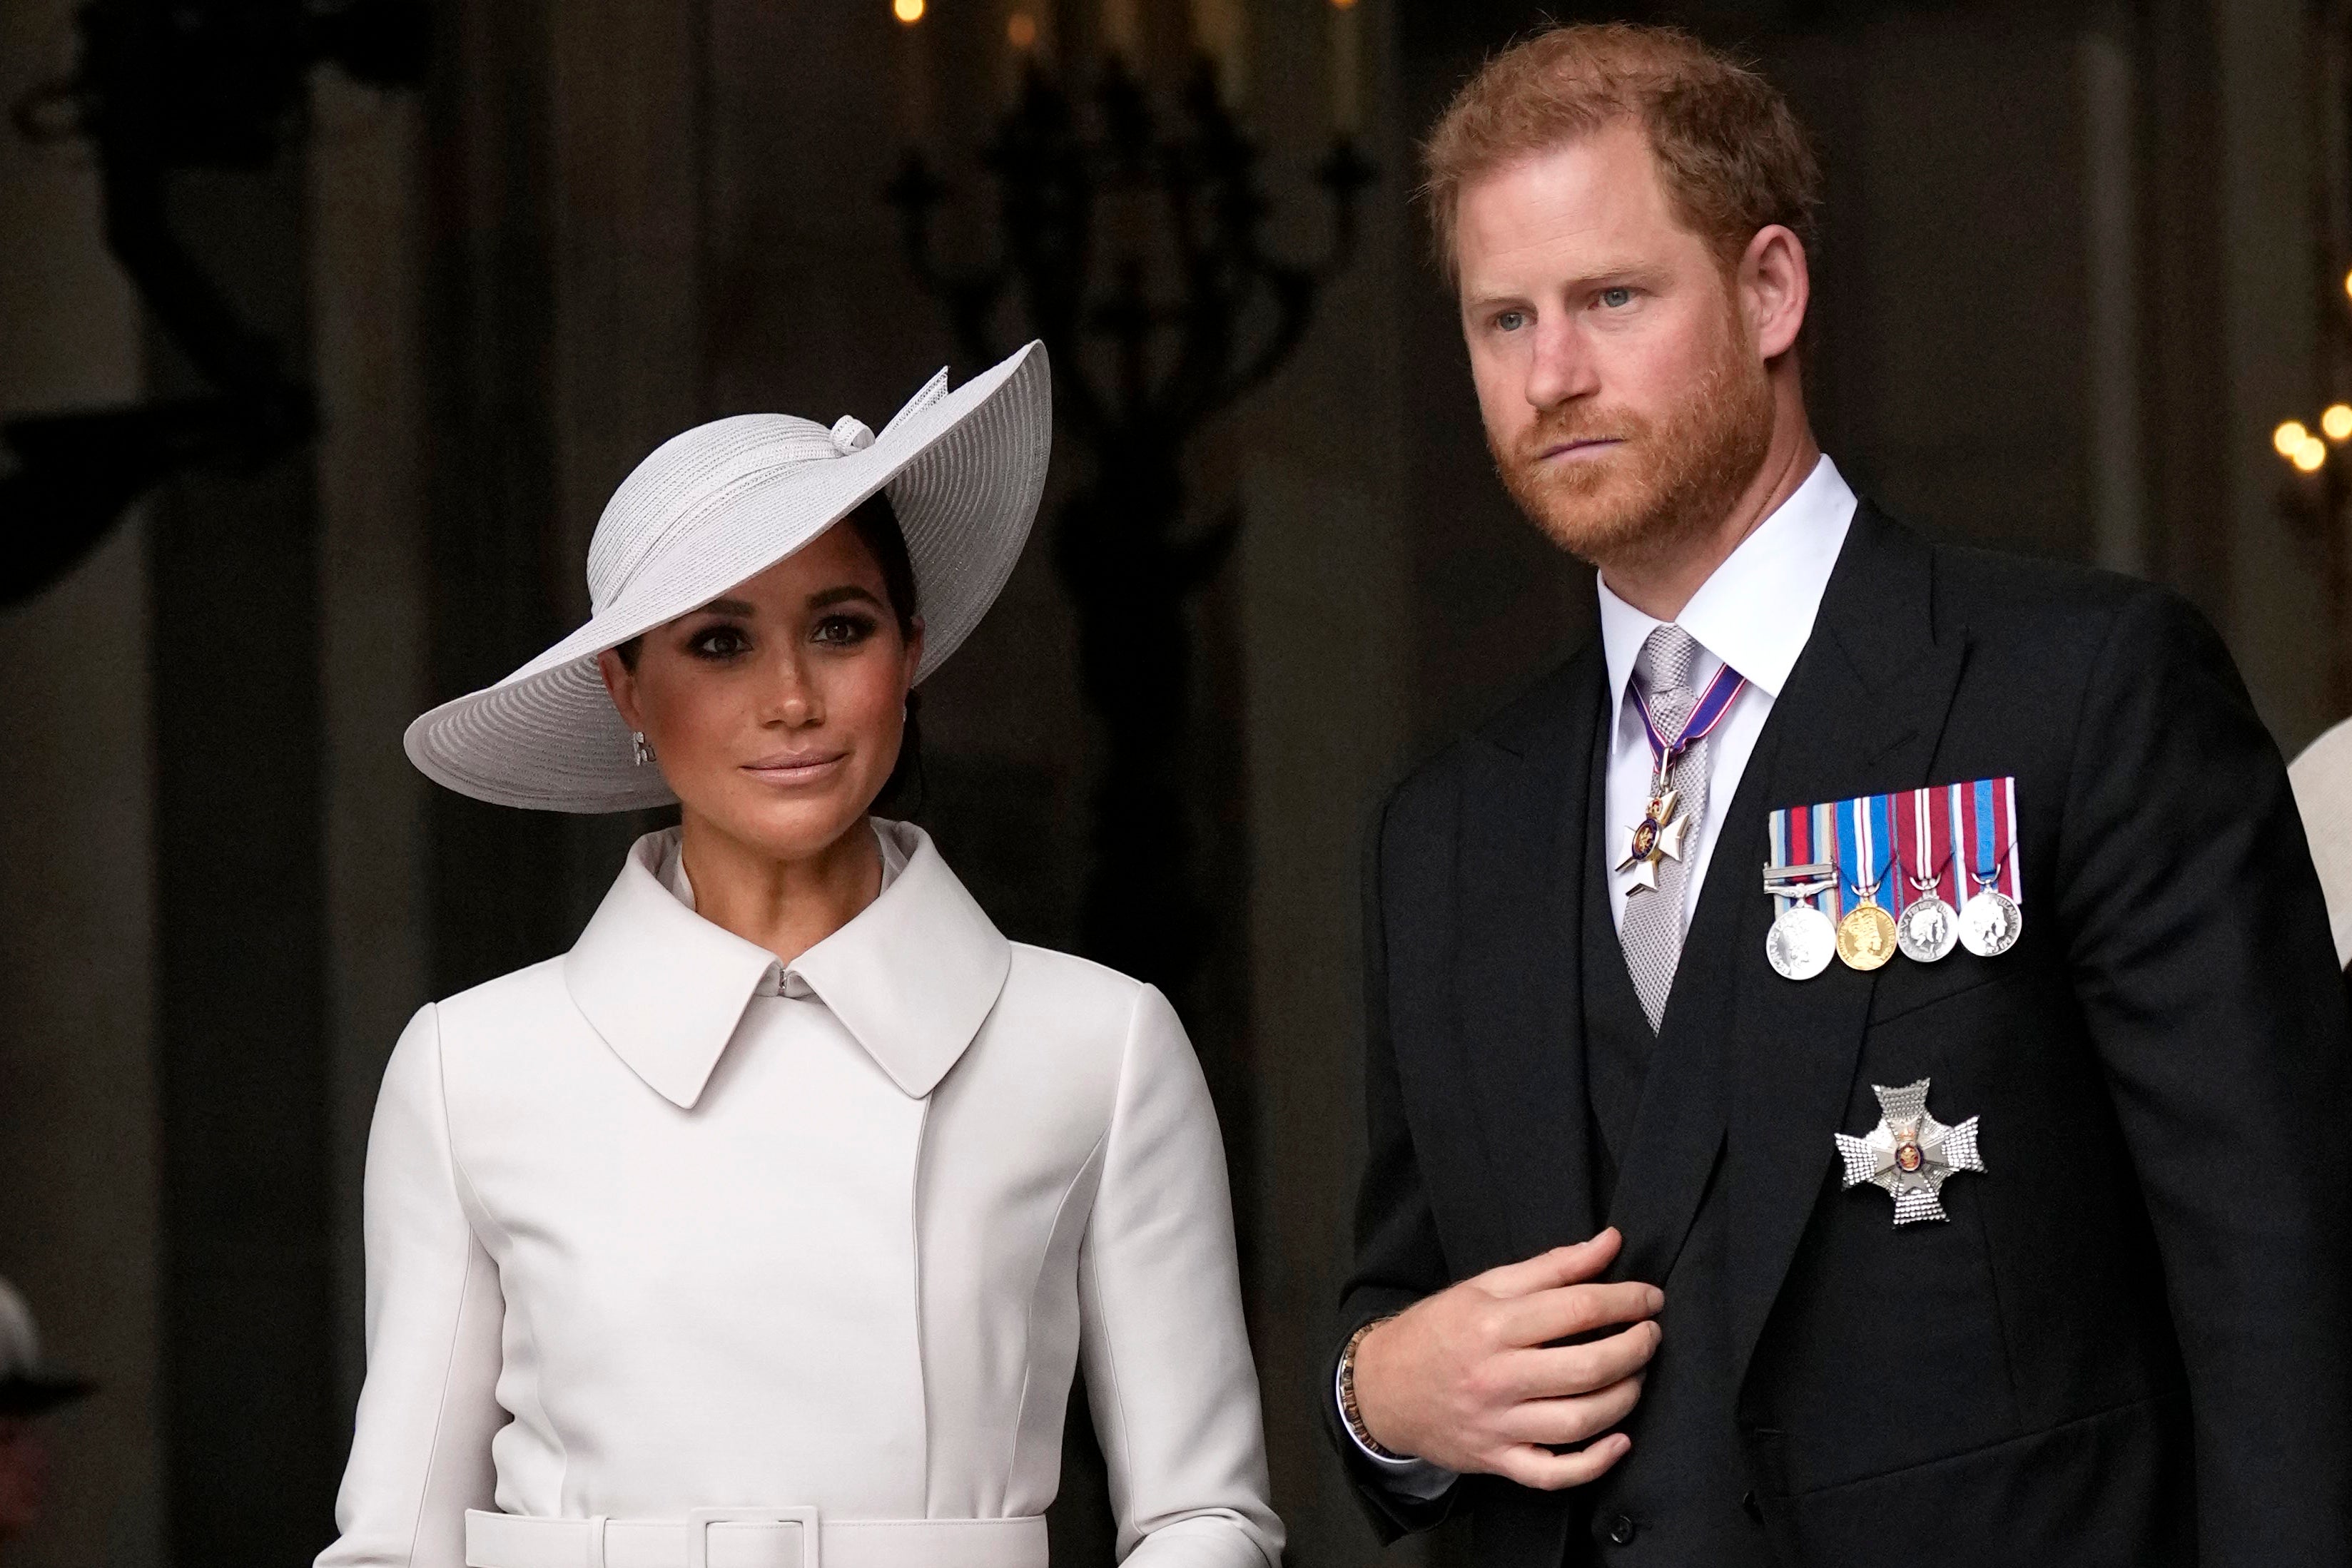 Prince Harry will attend the Coronation but Meghan will not, leaving a space in the seating plan